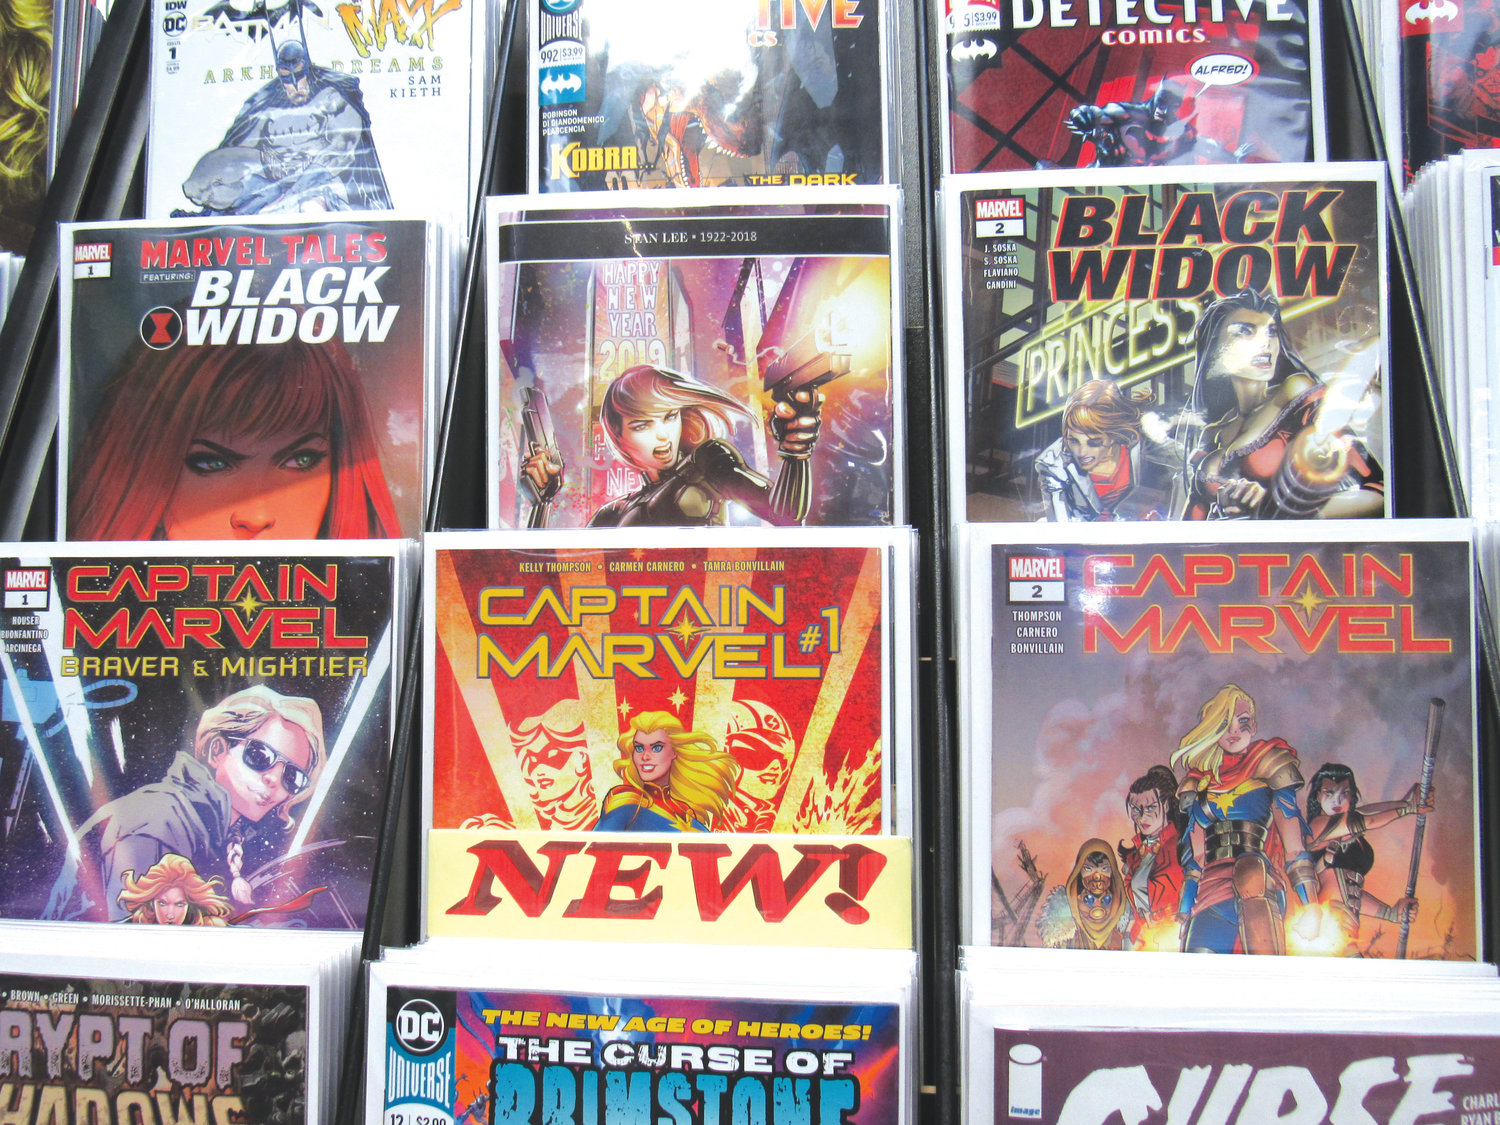 Comic books, film altered by proliferation of superhero movies | The